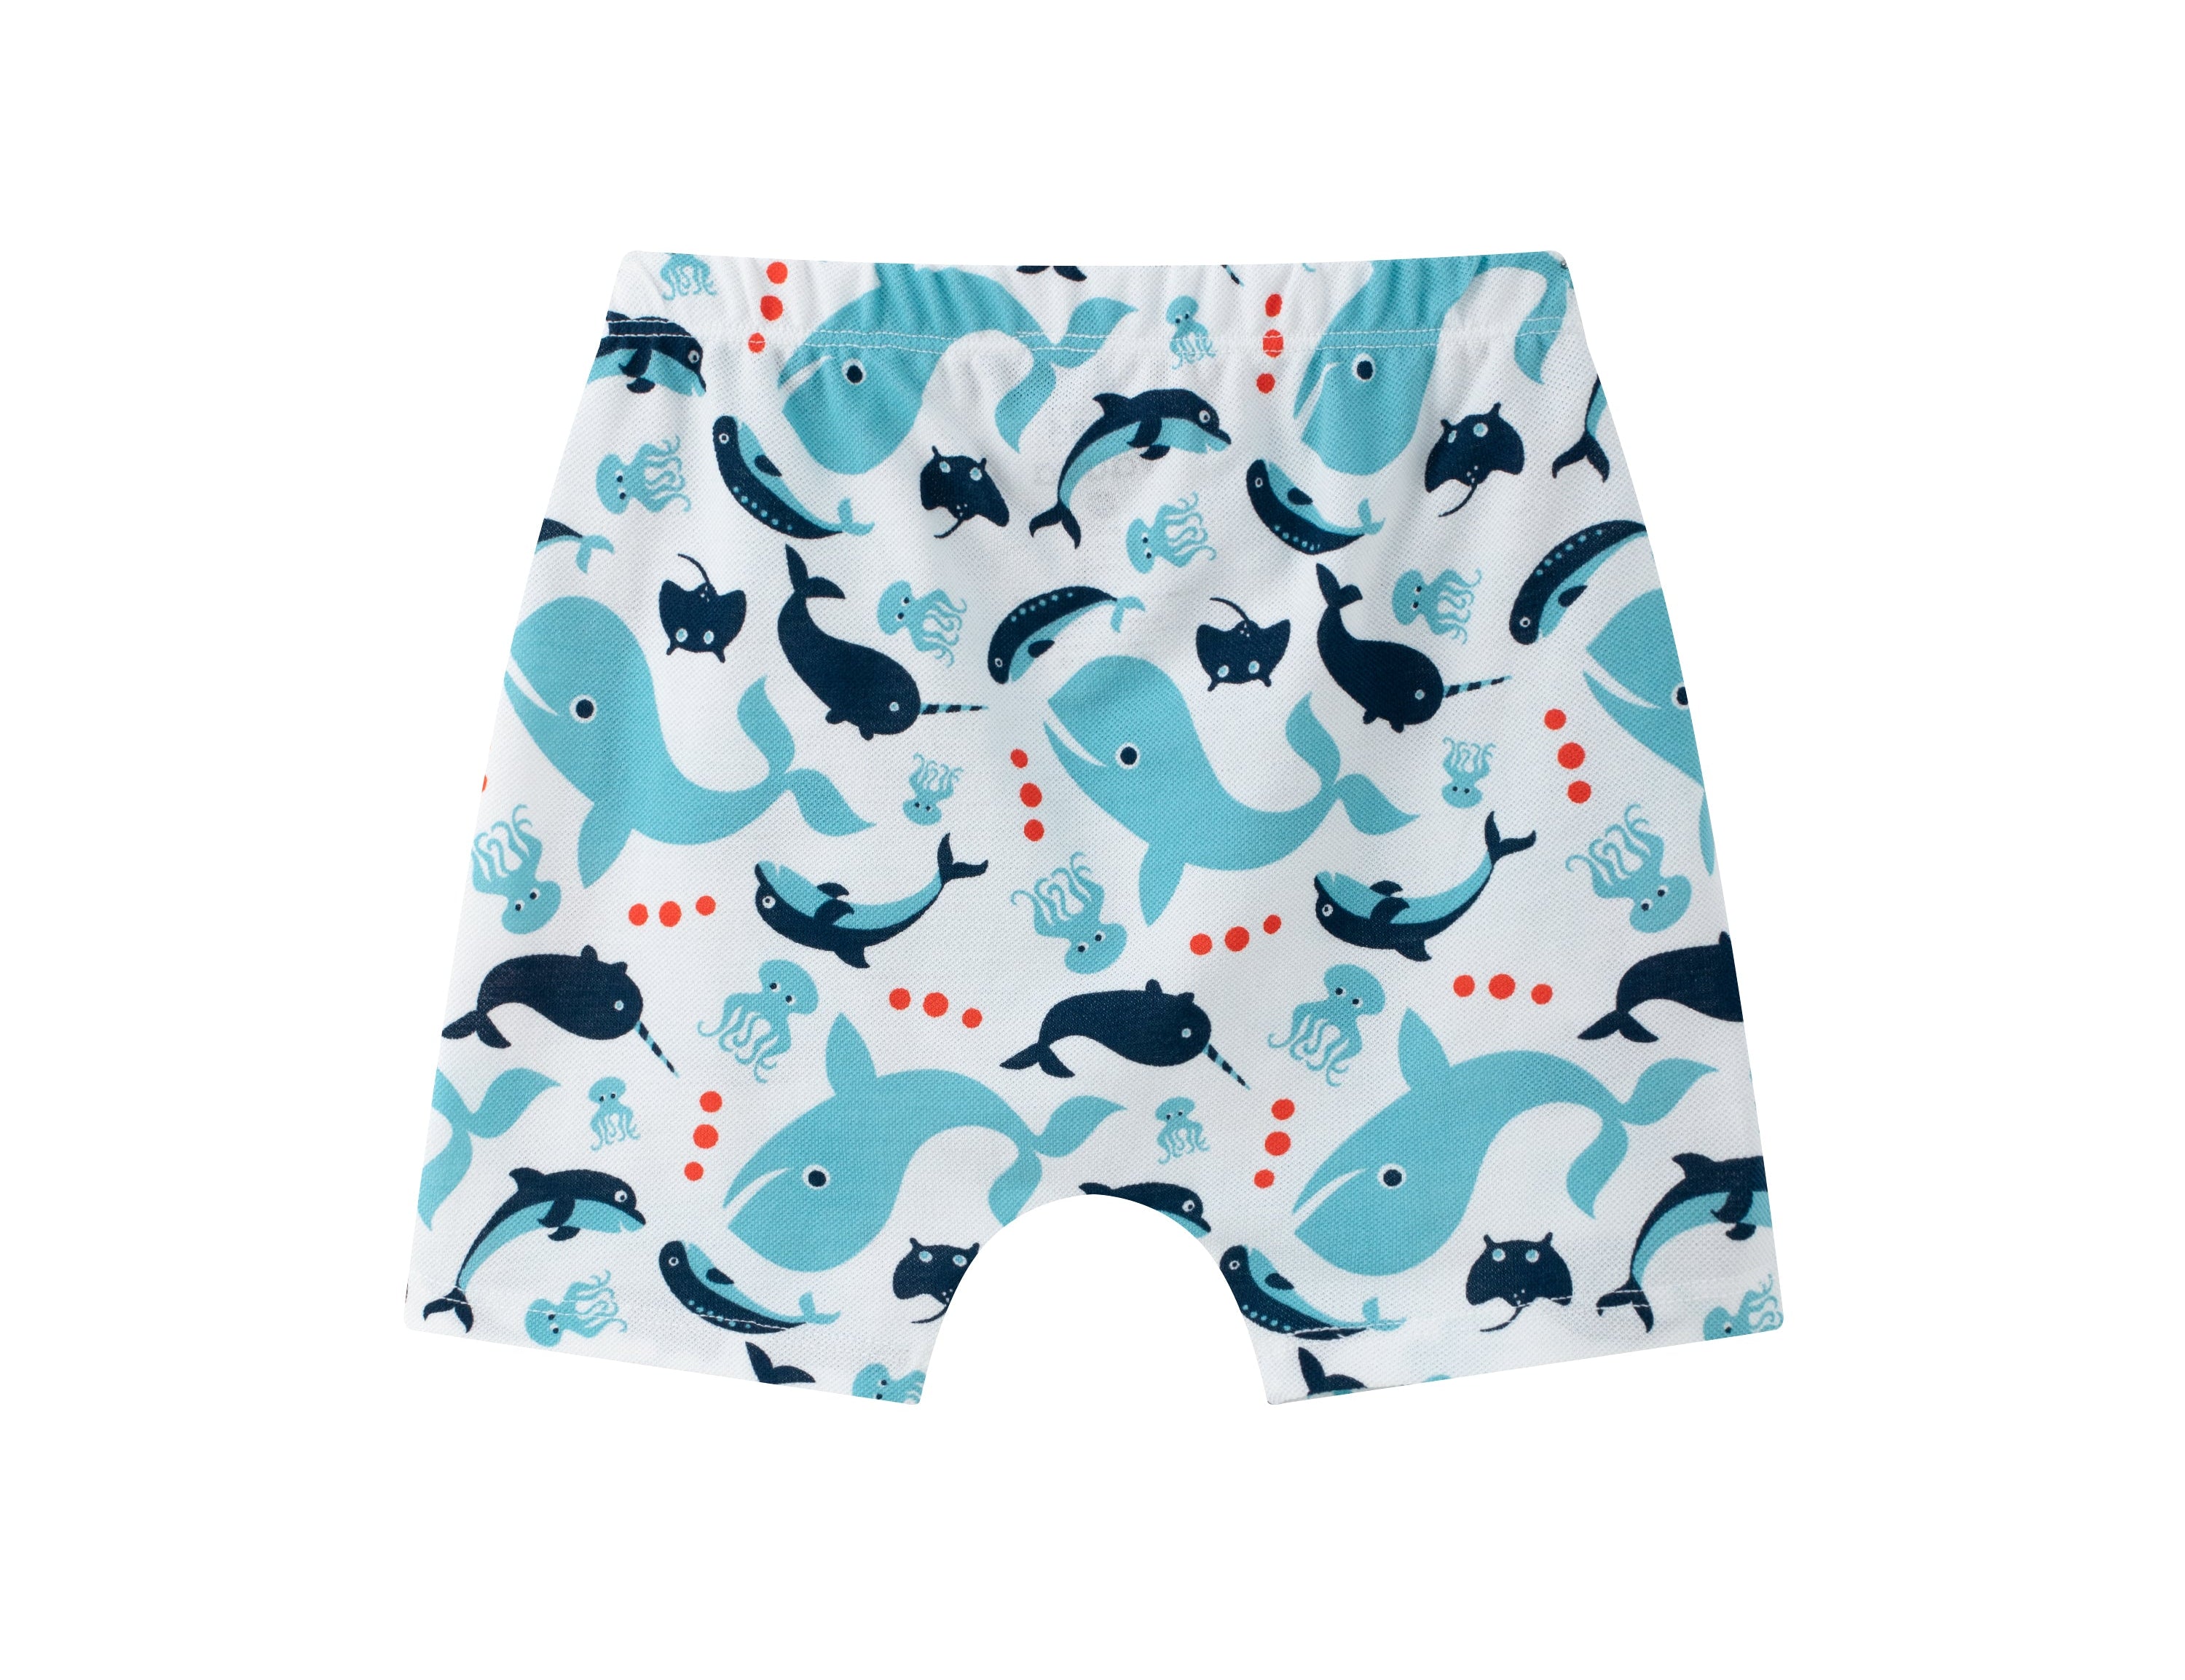 Vauva SS24 - Baby Boy Whale Print Shorts (White) - Product 1